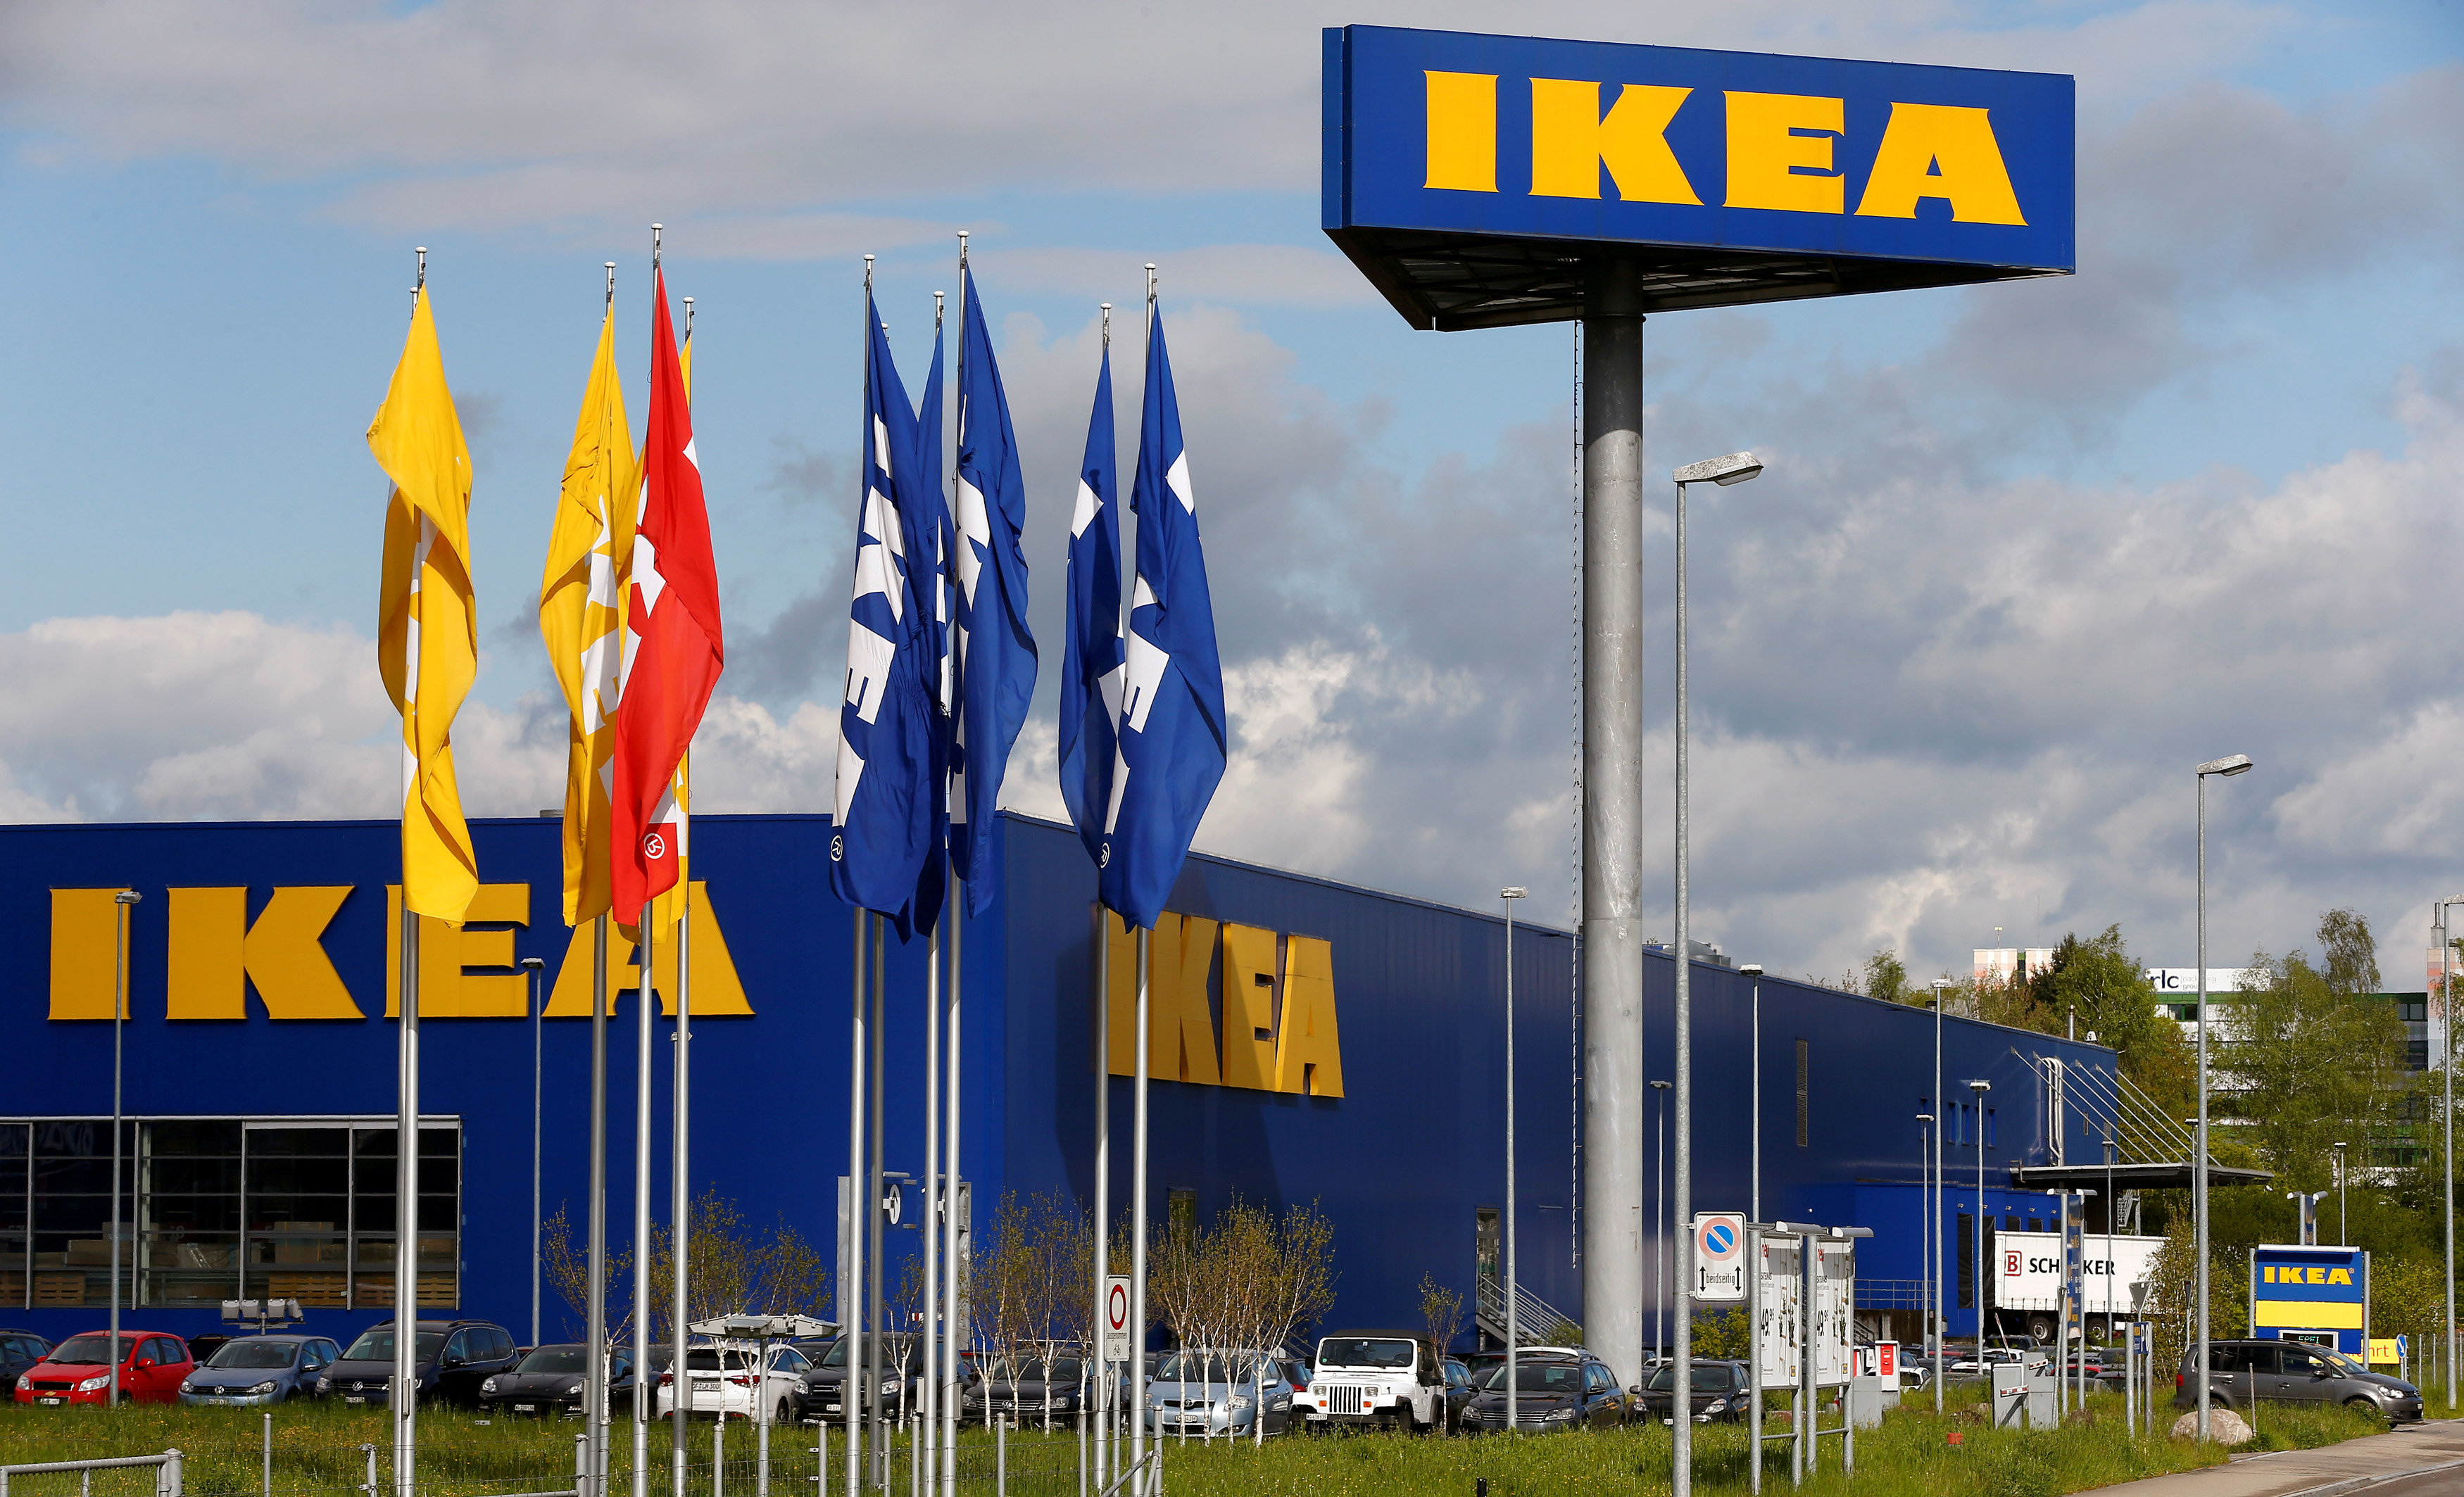 FILE PHOTO: The company's logo is seen outside of an IKEA Group store in Spreitenbach